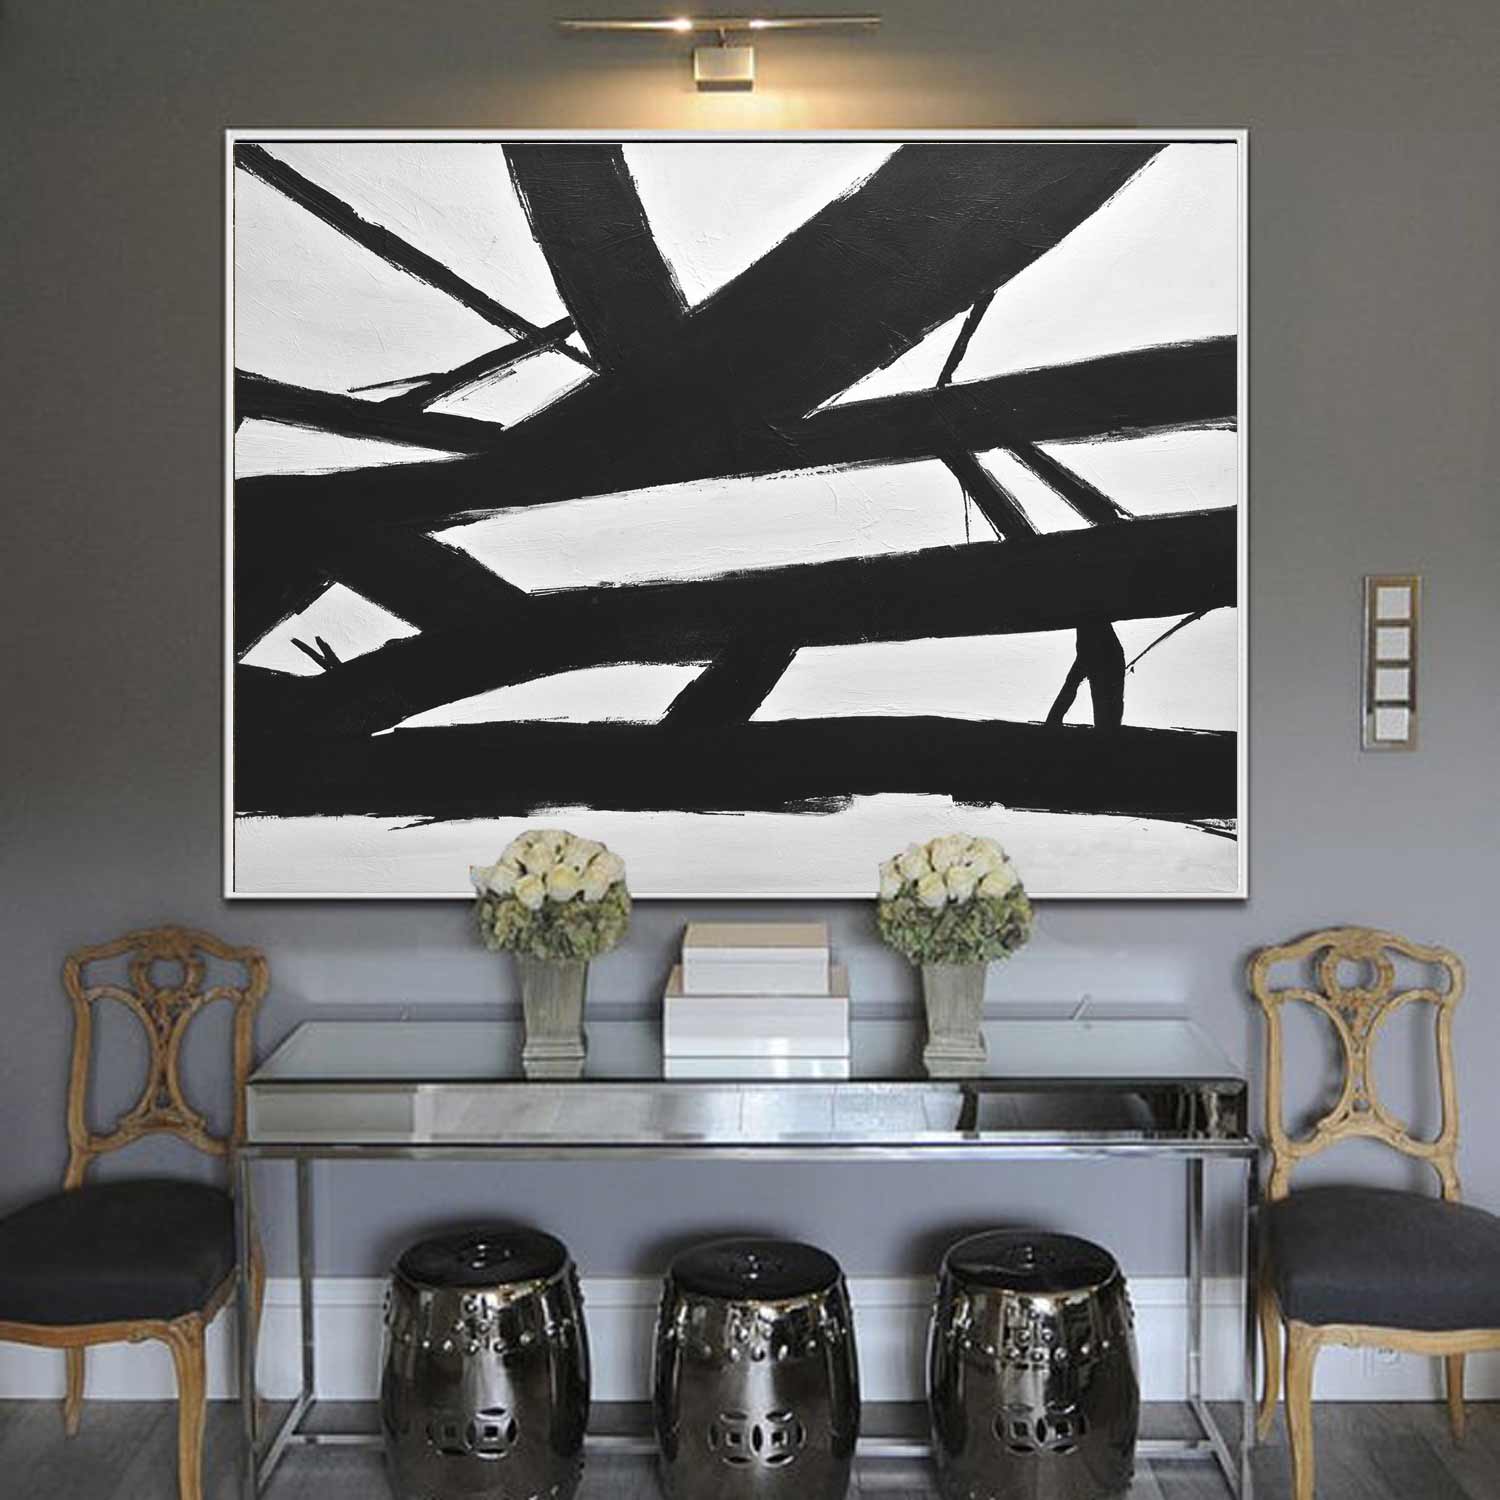 Geometric Black White Abstract Kline Painting "Crossing the Line"